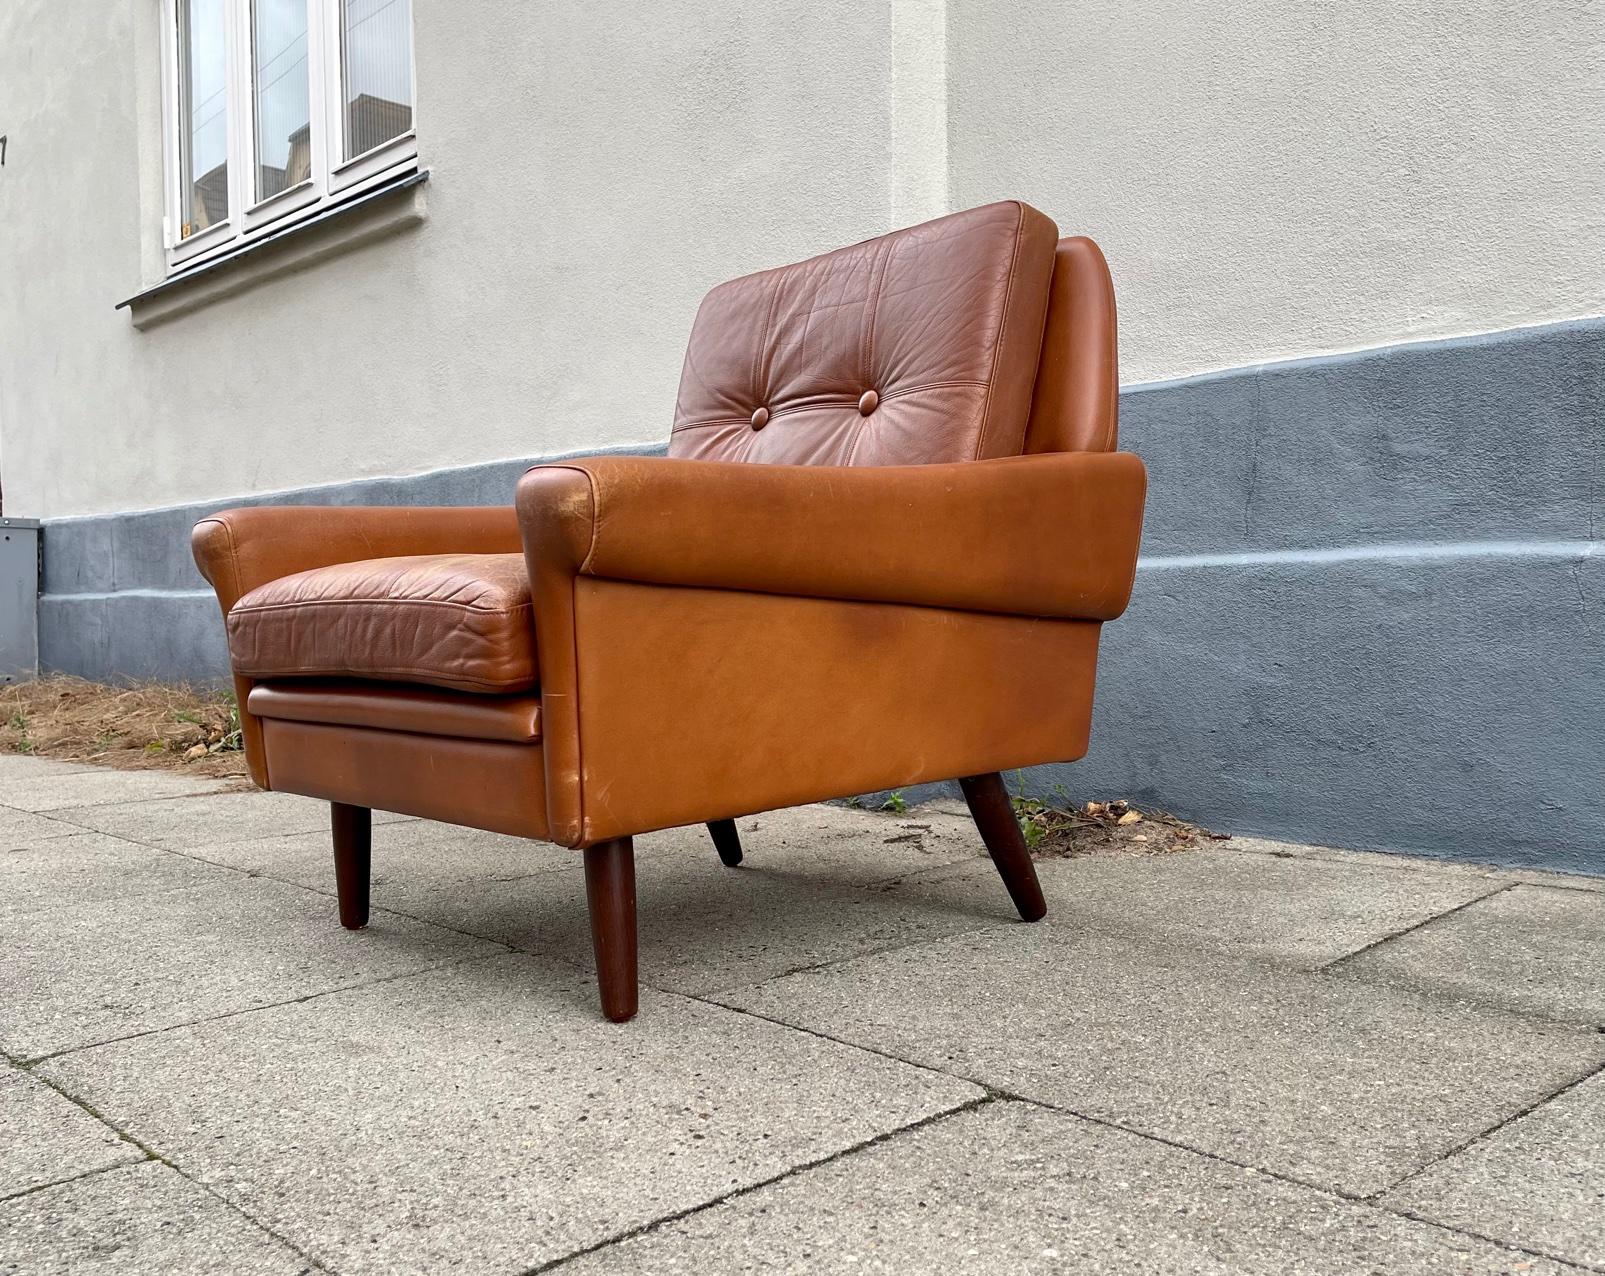 Lowriding (38 cm) all original Georg Thams lounge chair designed during the mid 1960s and manufactured at Thams Møbler in Denmark. This example retains its original soft brown cognac/tanned leather. It has tapered legs in solid teak.